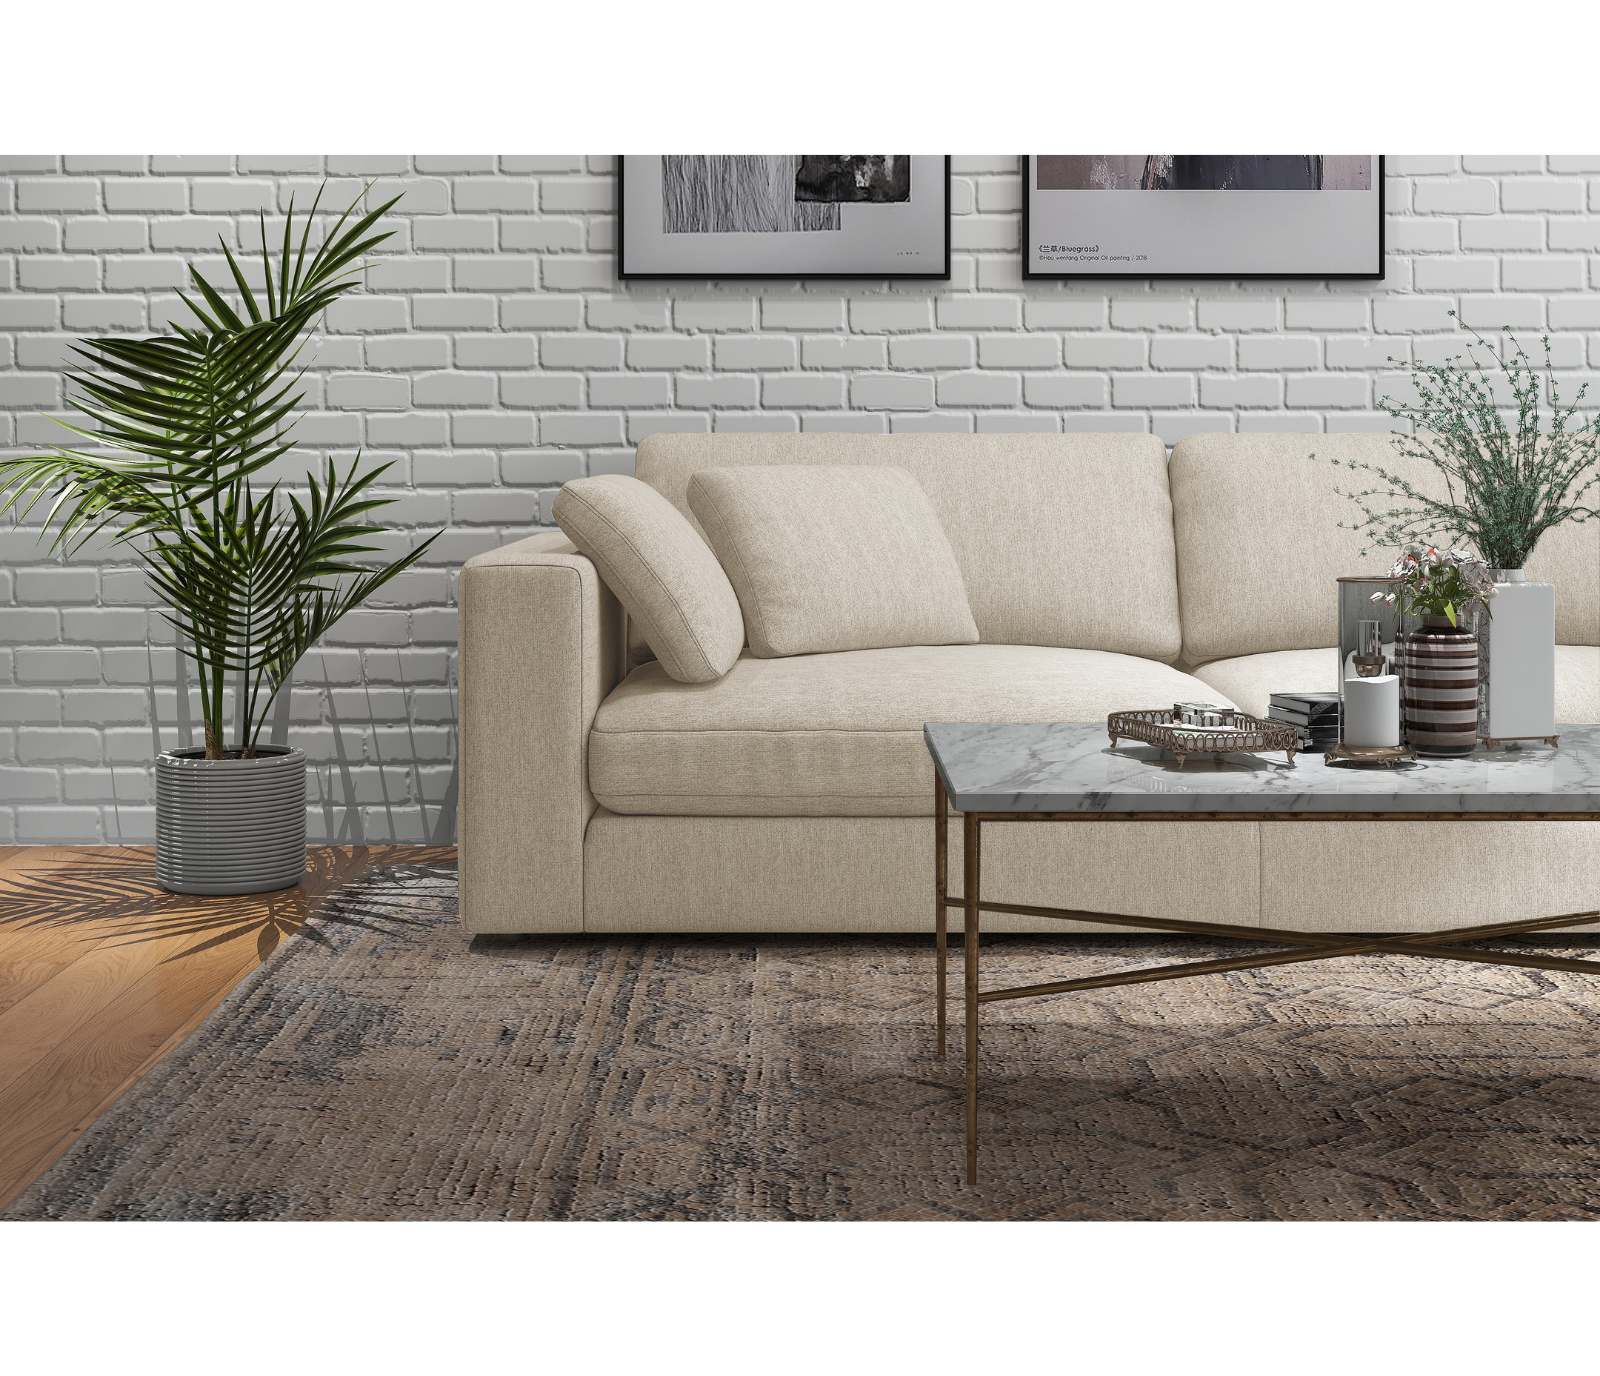 Janelle 3 Piece Sectional - Beige Fabric